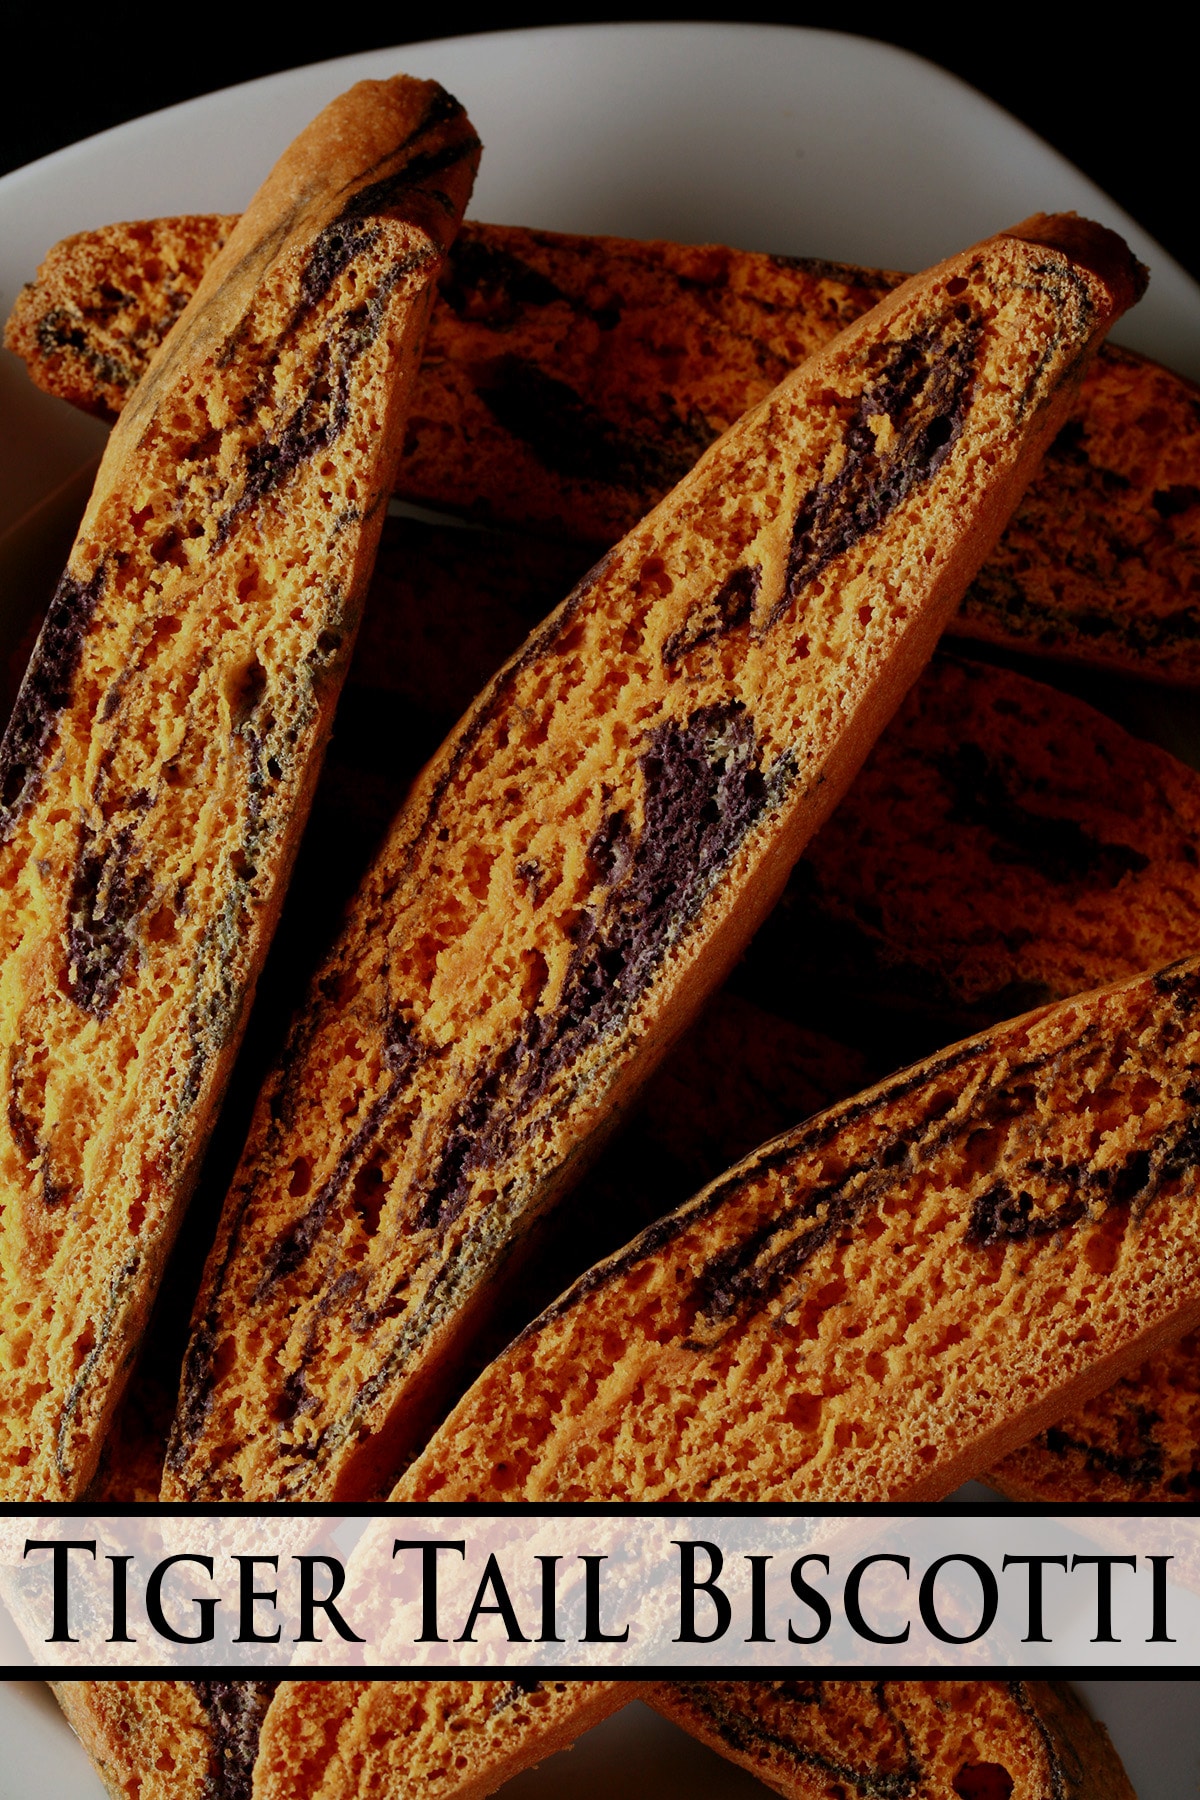 A plate of tiger tail biscotti: Orange and anise, marbled.